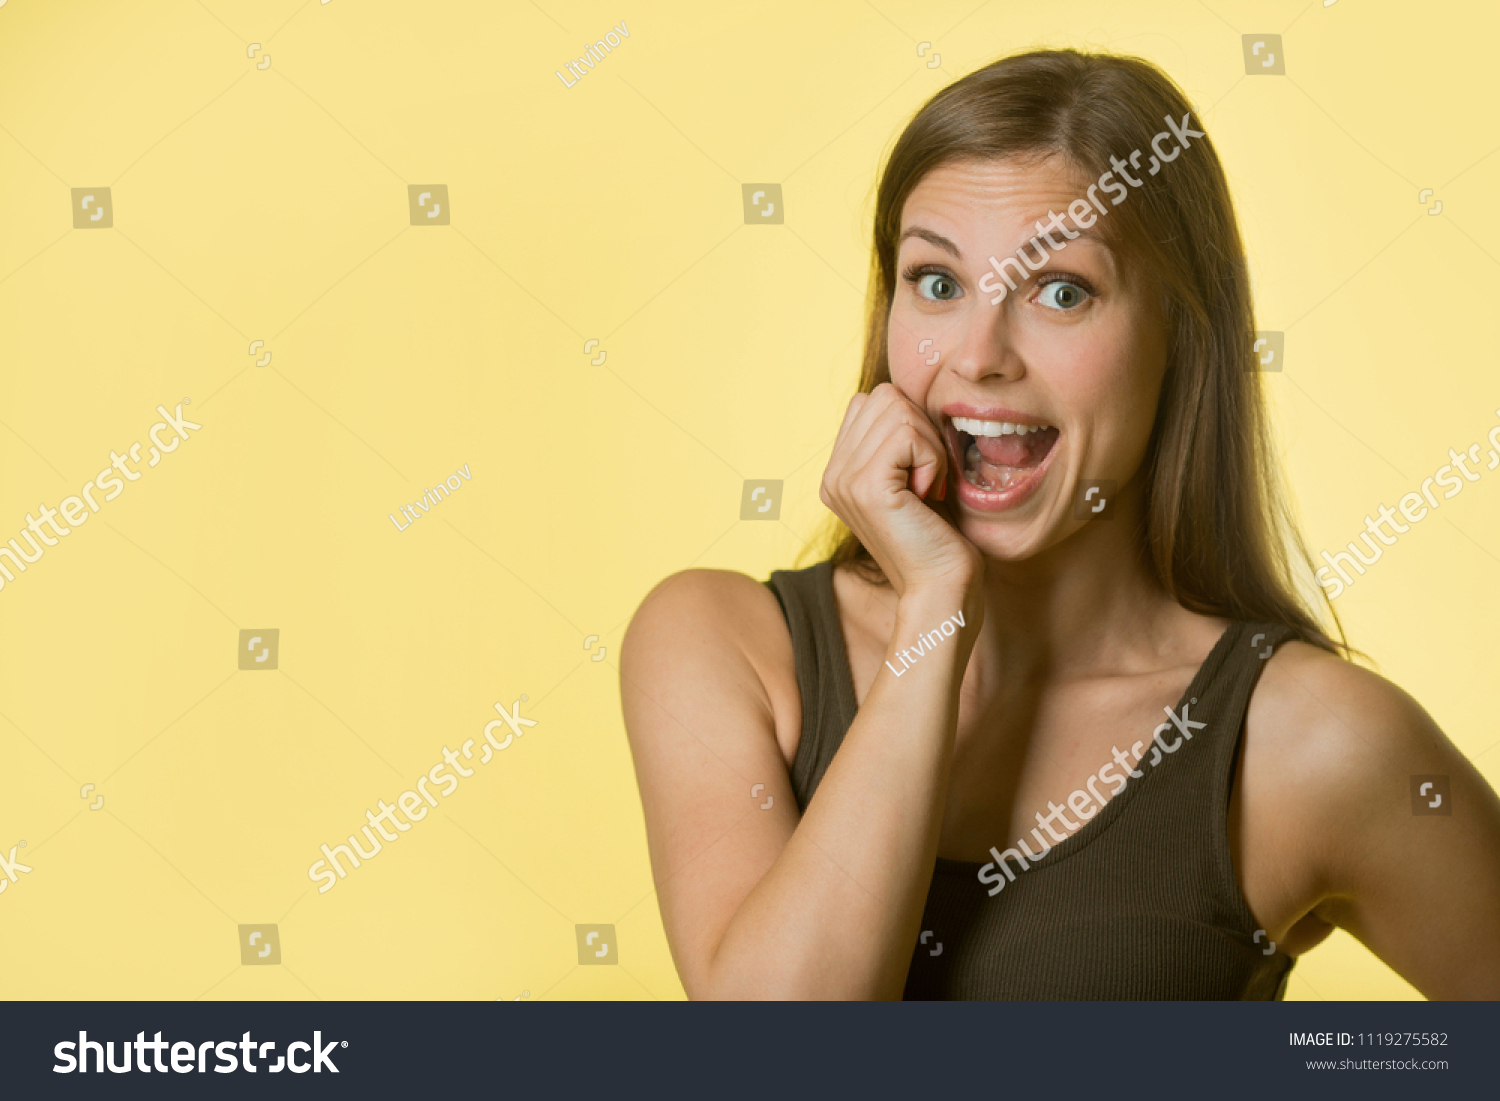 beautiful young girl with her hair on yellow background #1119275582